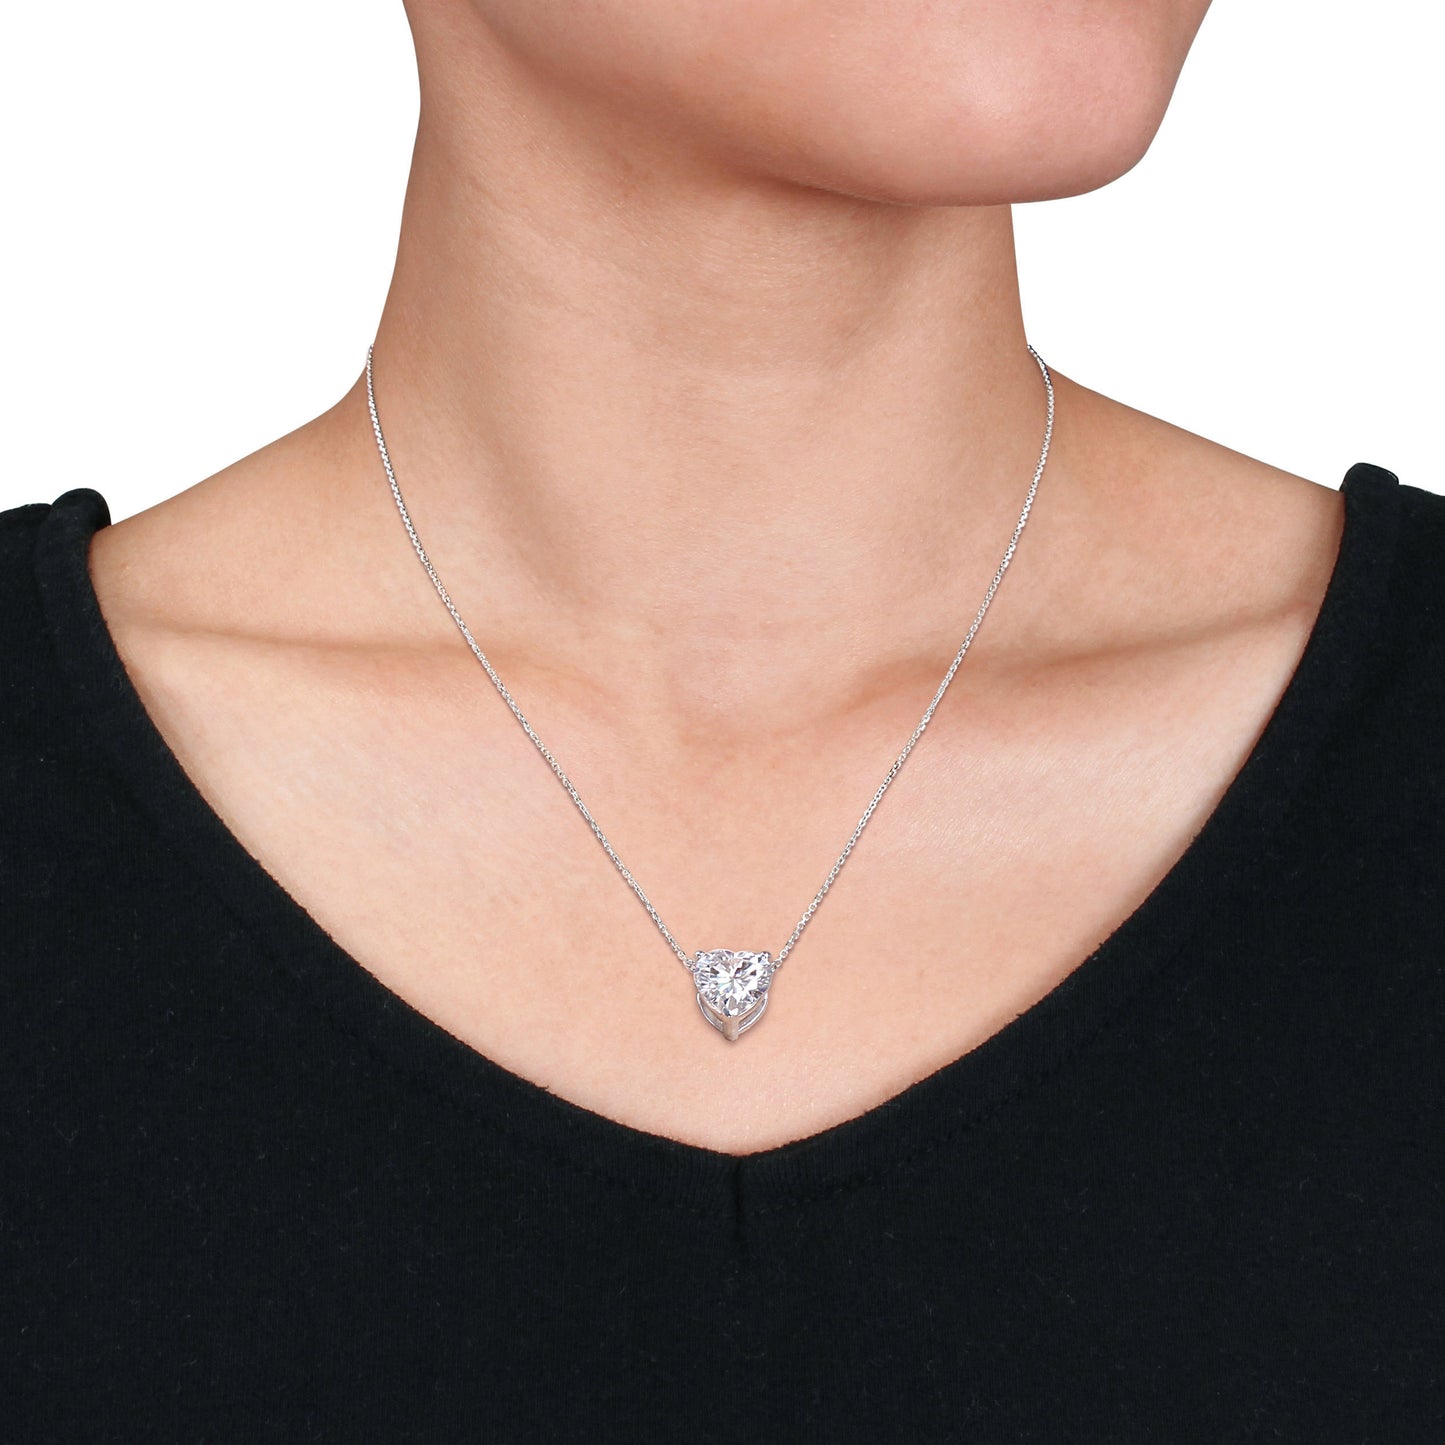 3 CT DEW Moissanite Heart Pendant With Chain 14k White Gold